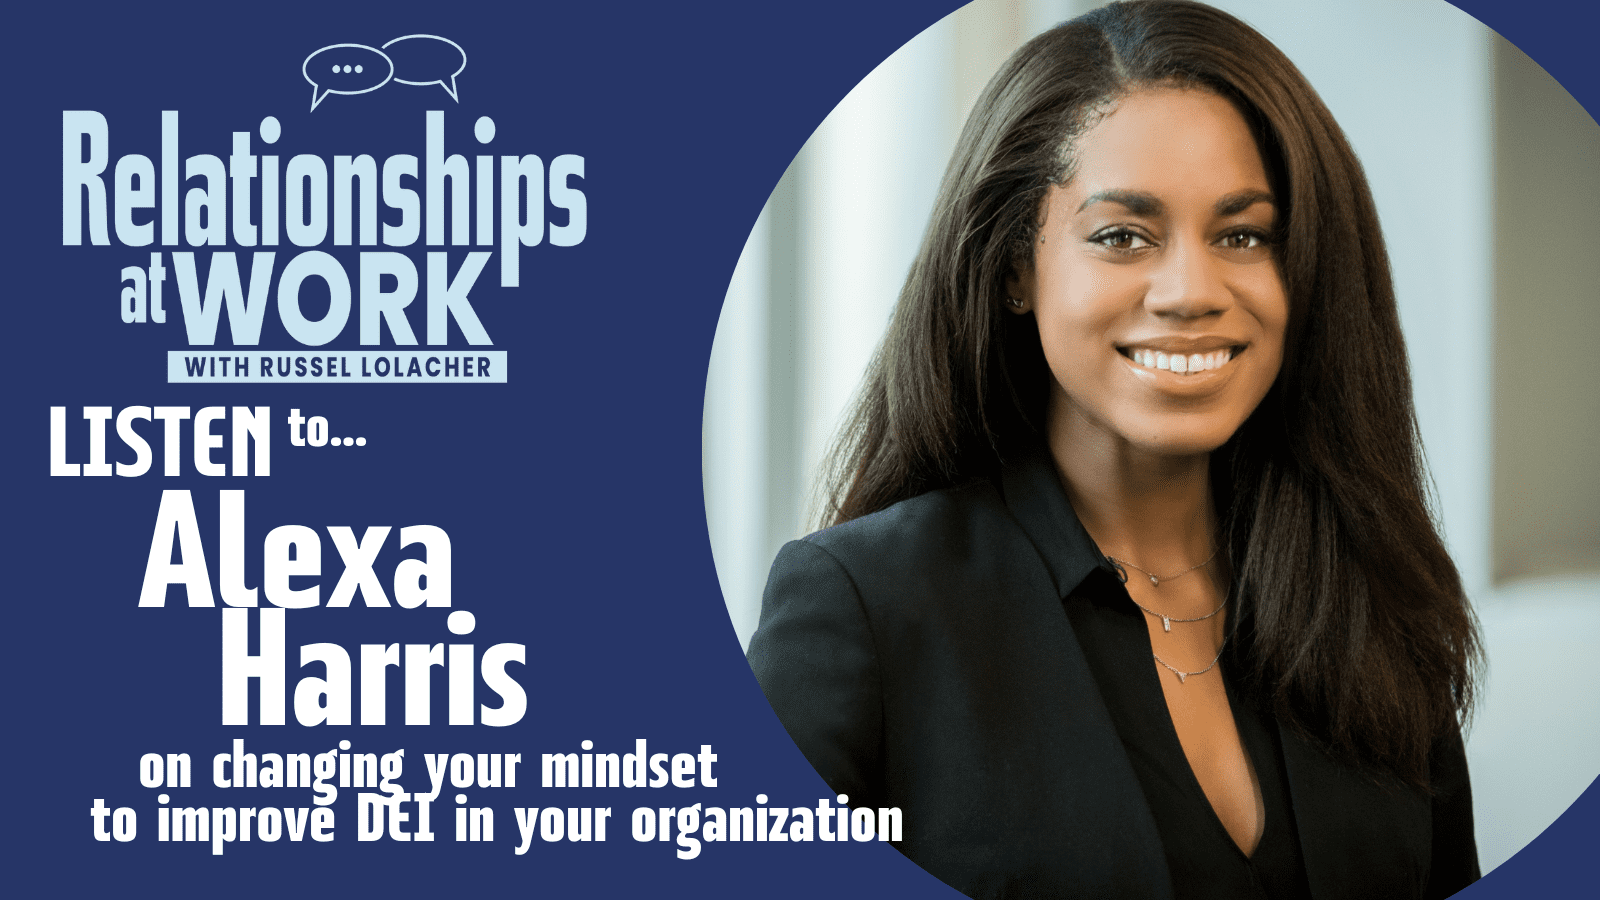 Alexa Harris discusses DEI - diversity, equity and inclusion in the workplace